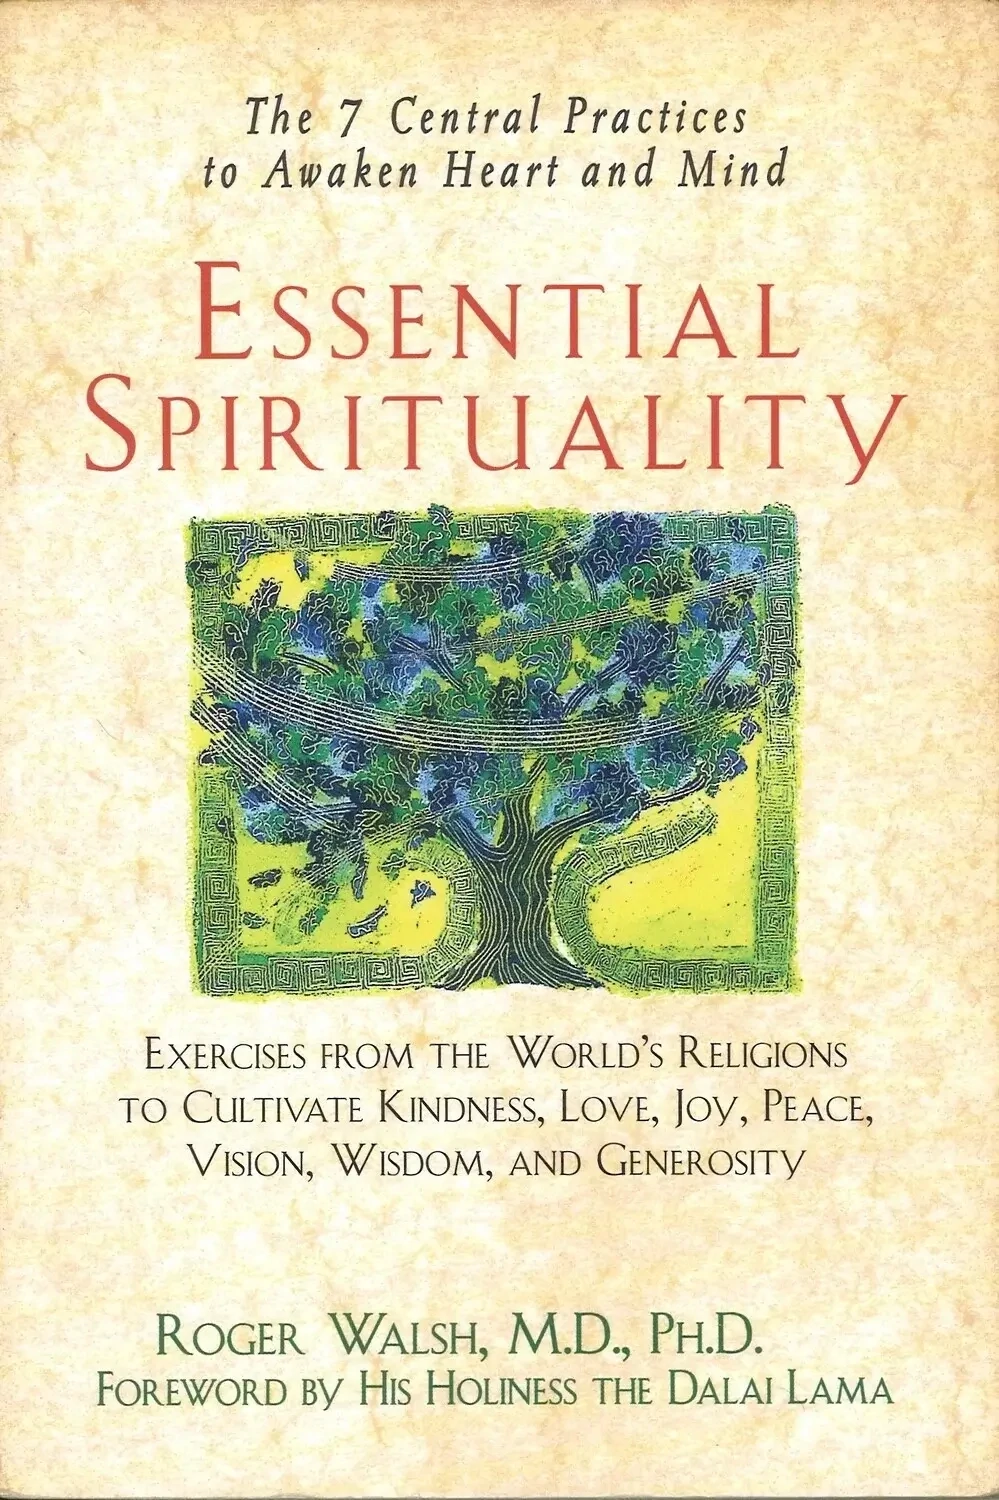 Essential Spirituality by Roger Walsh